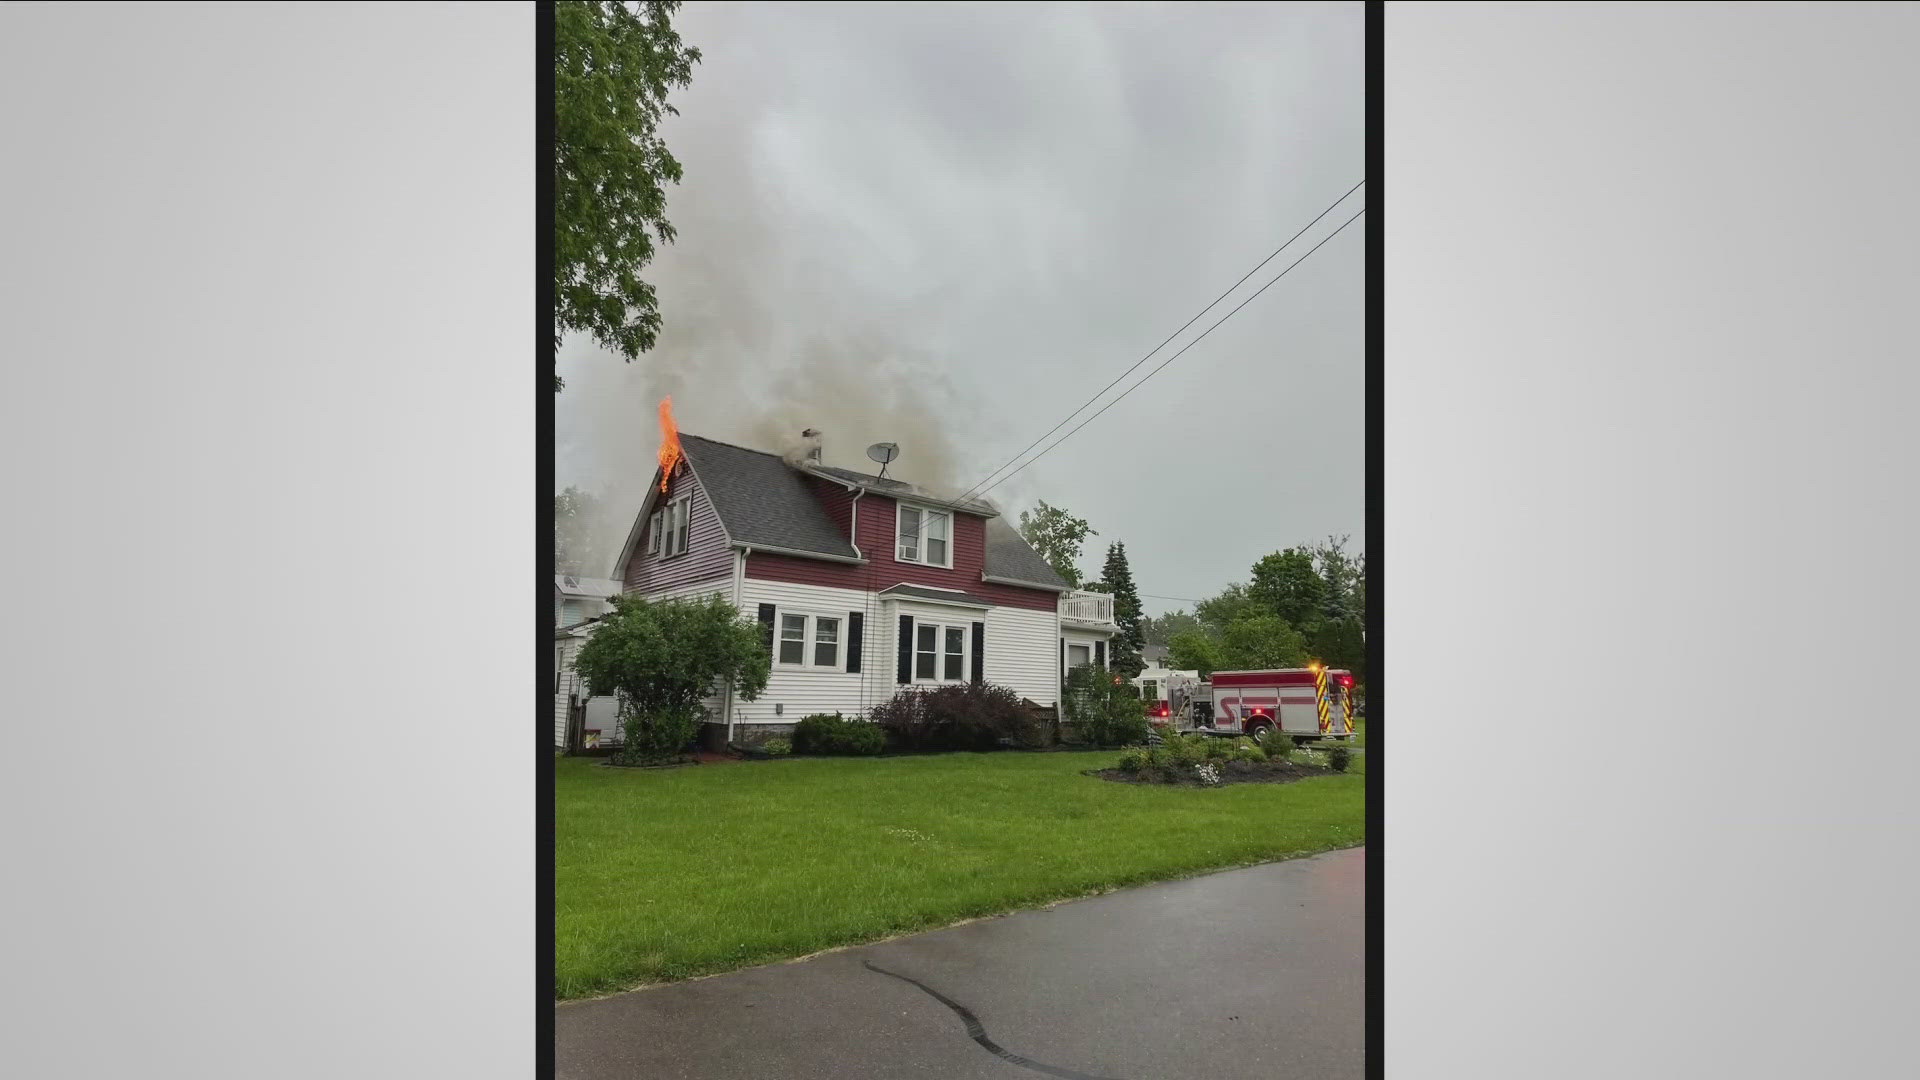 A neighbor shot dramatic video of the moment the Holland Avenue house was struck by lightning during Wednesday's storm in Hamburg.